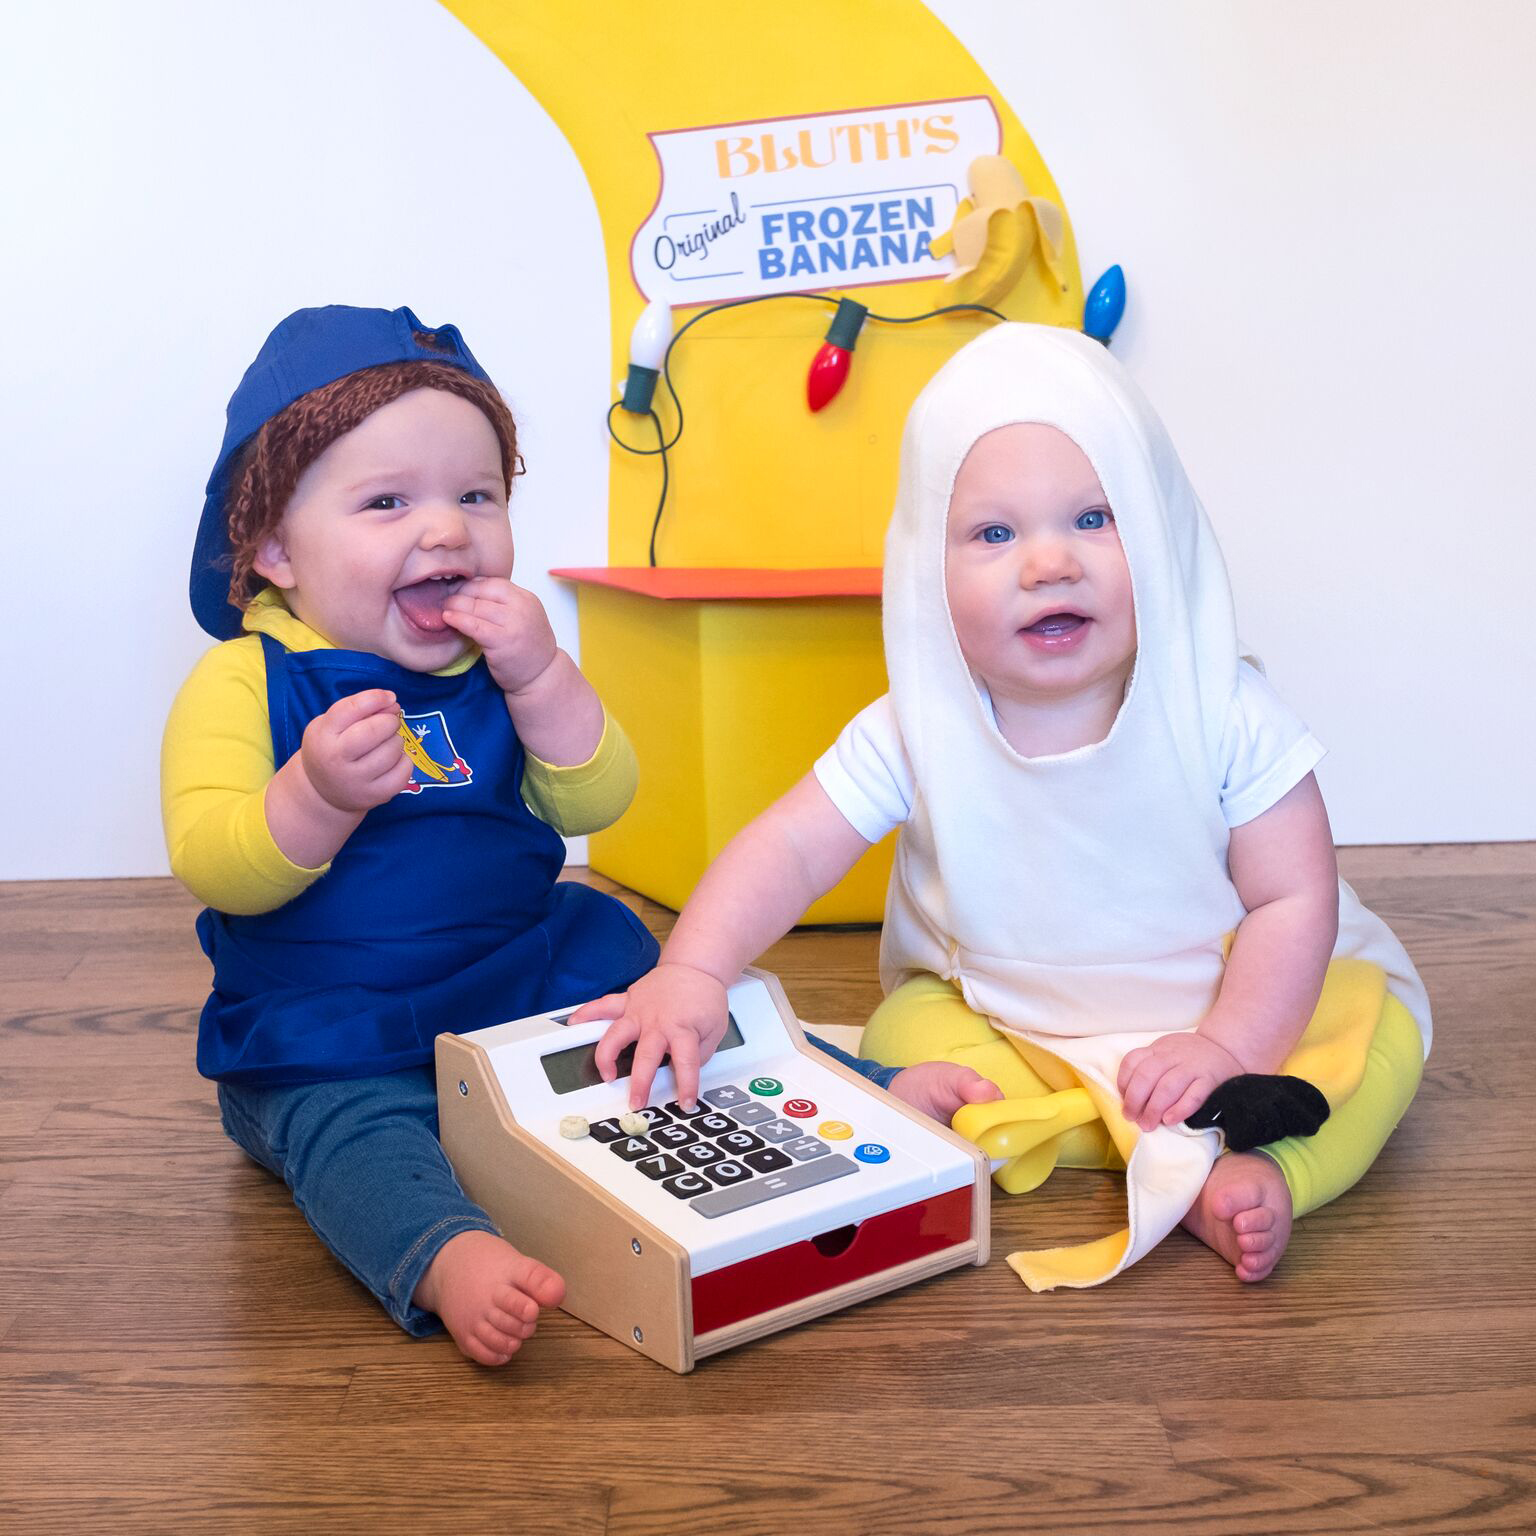 PHOTO: Lera and Marigold Mancke, 8-month-old twins, pose as characters from "Arrested Development."
